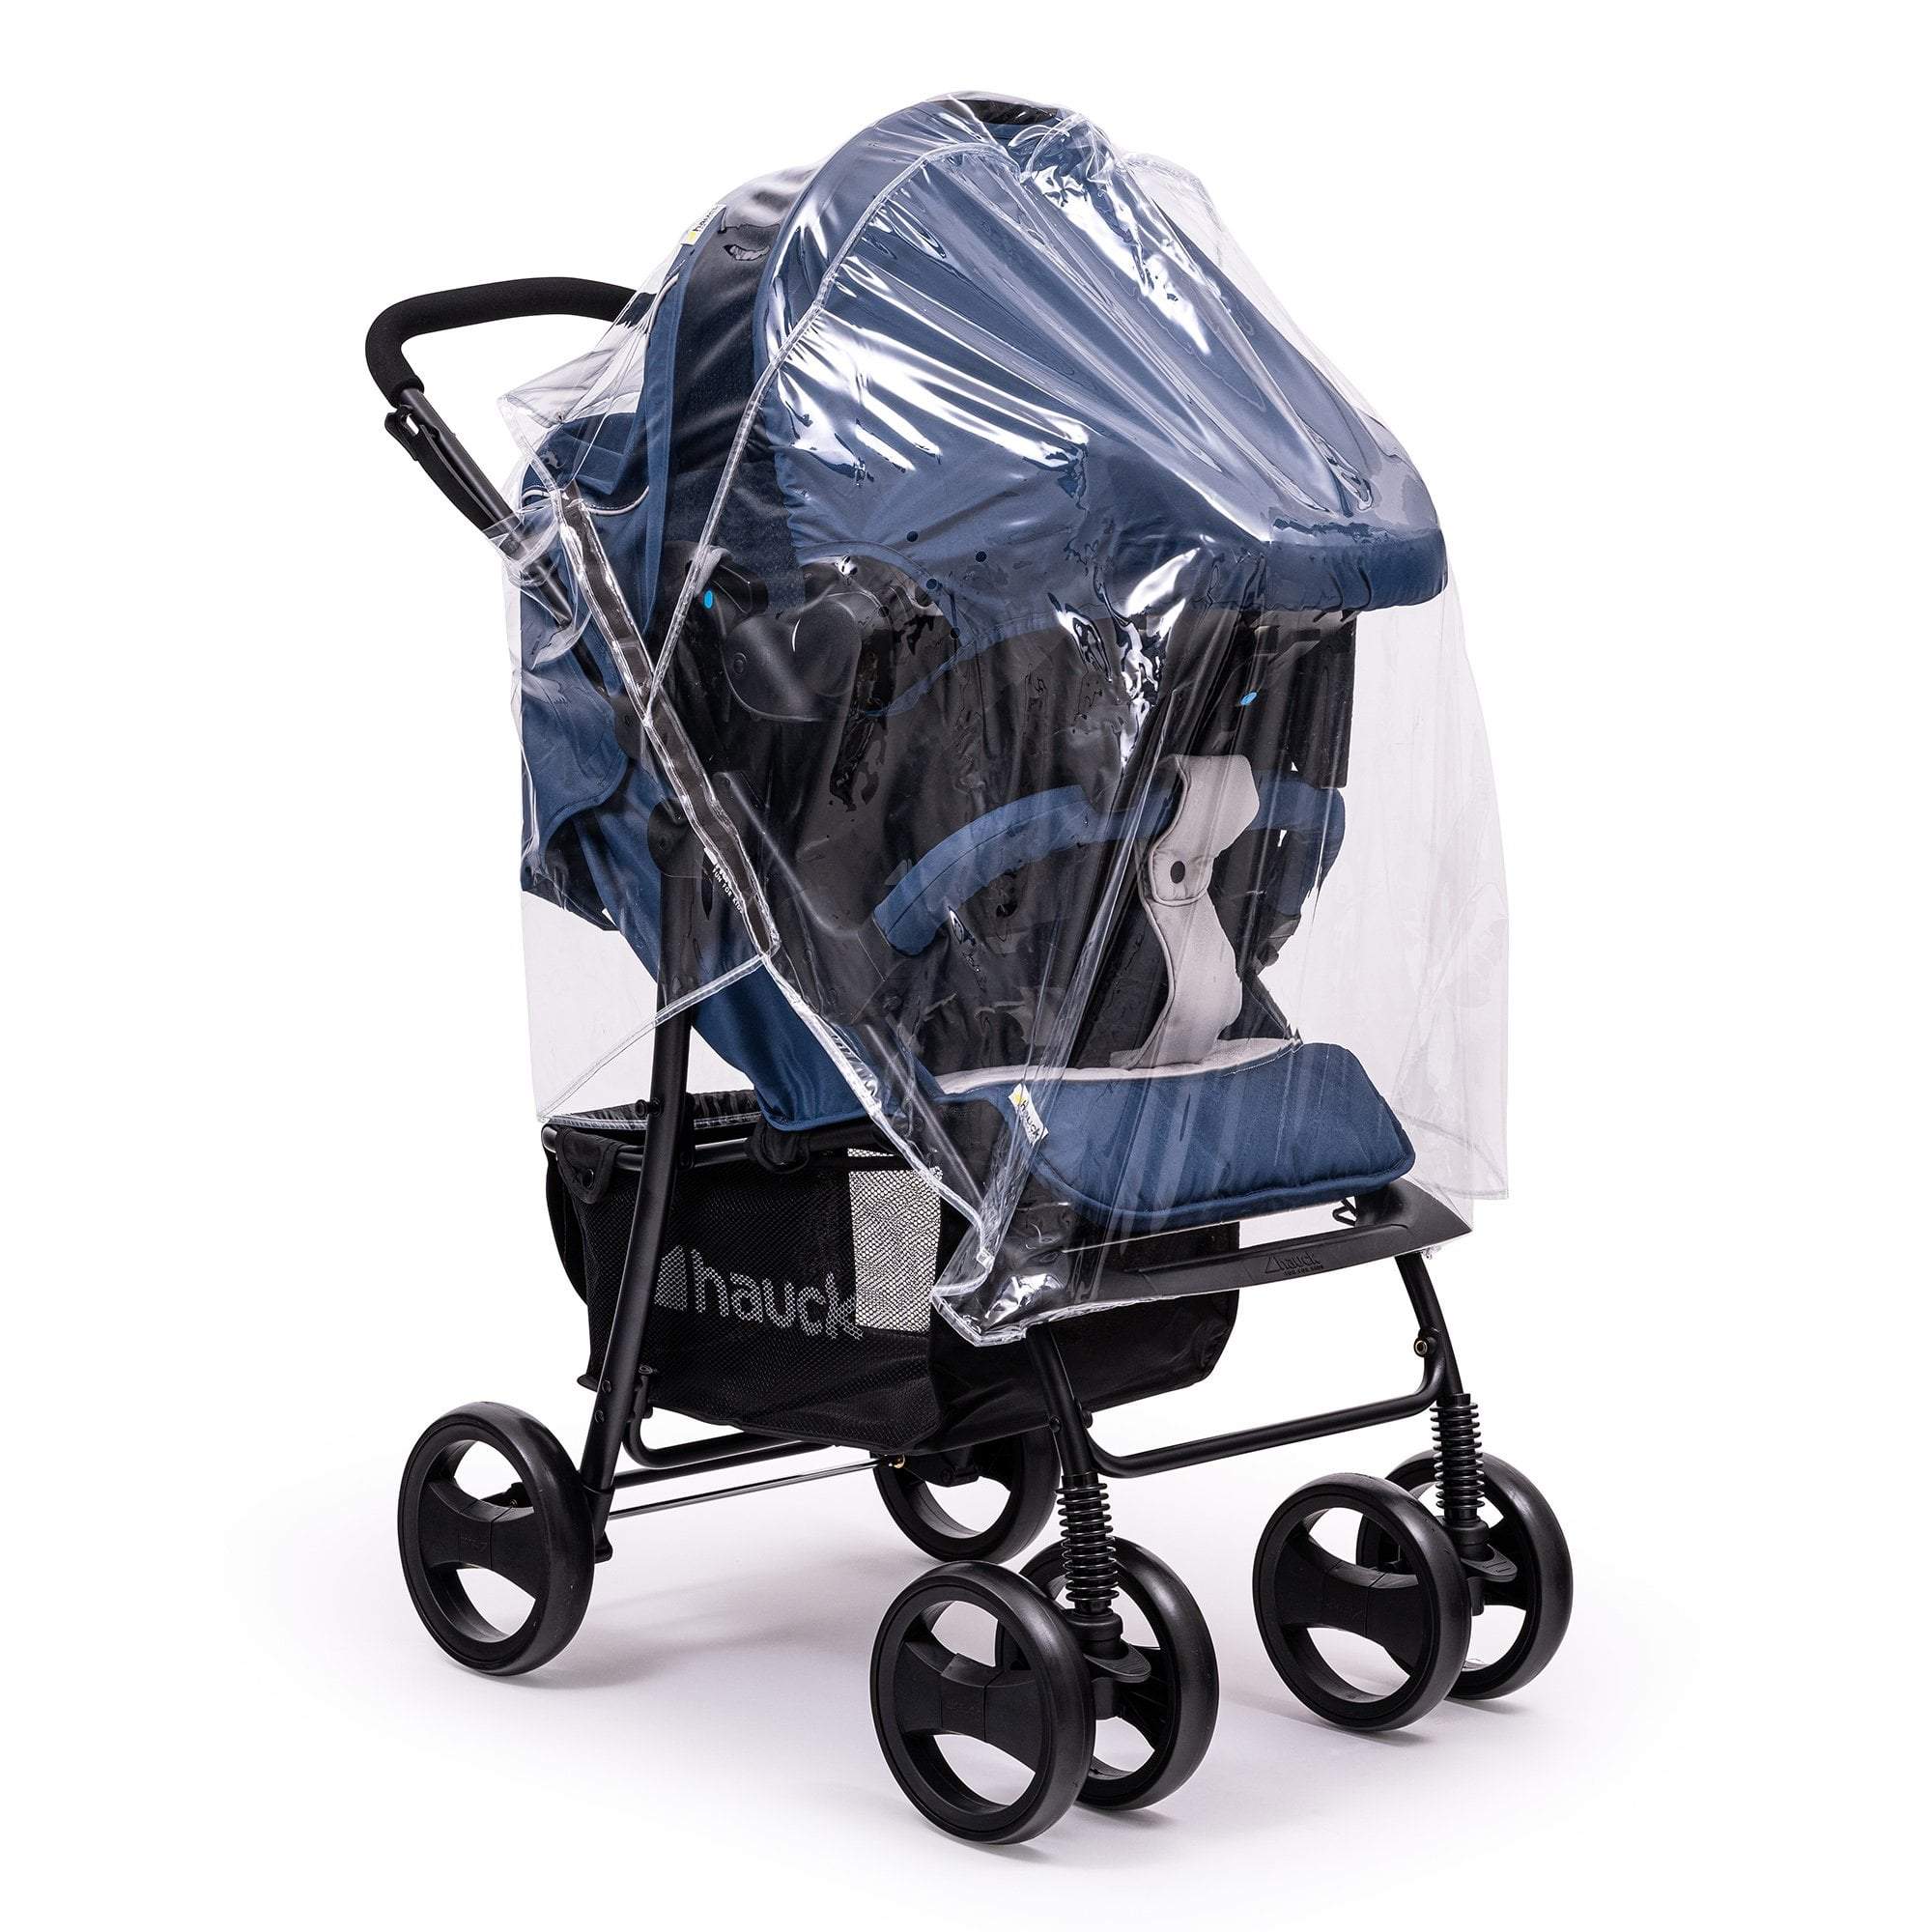 Travel System Raincover Compatible with Babylo - Fits All Models -  | For Your Little One